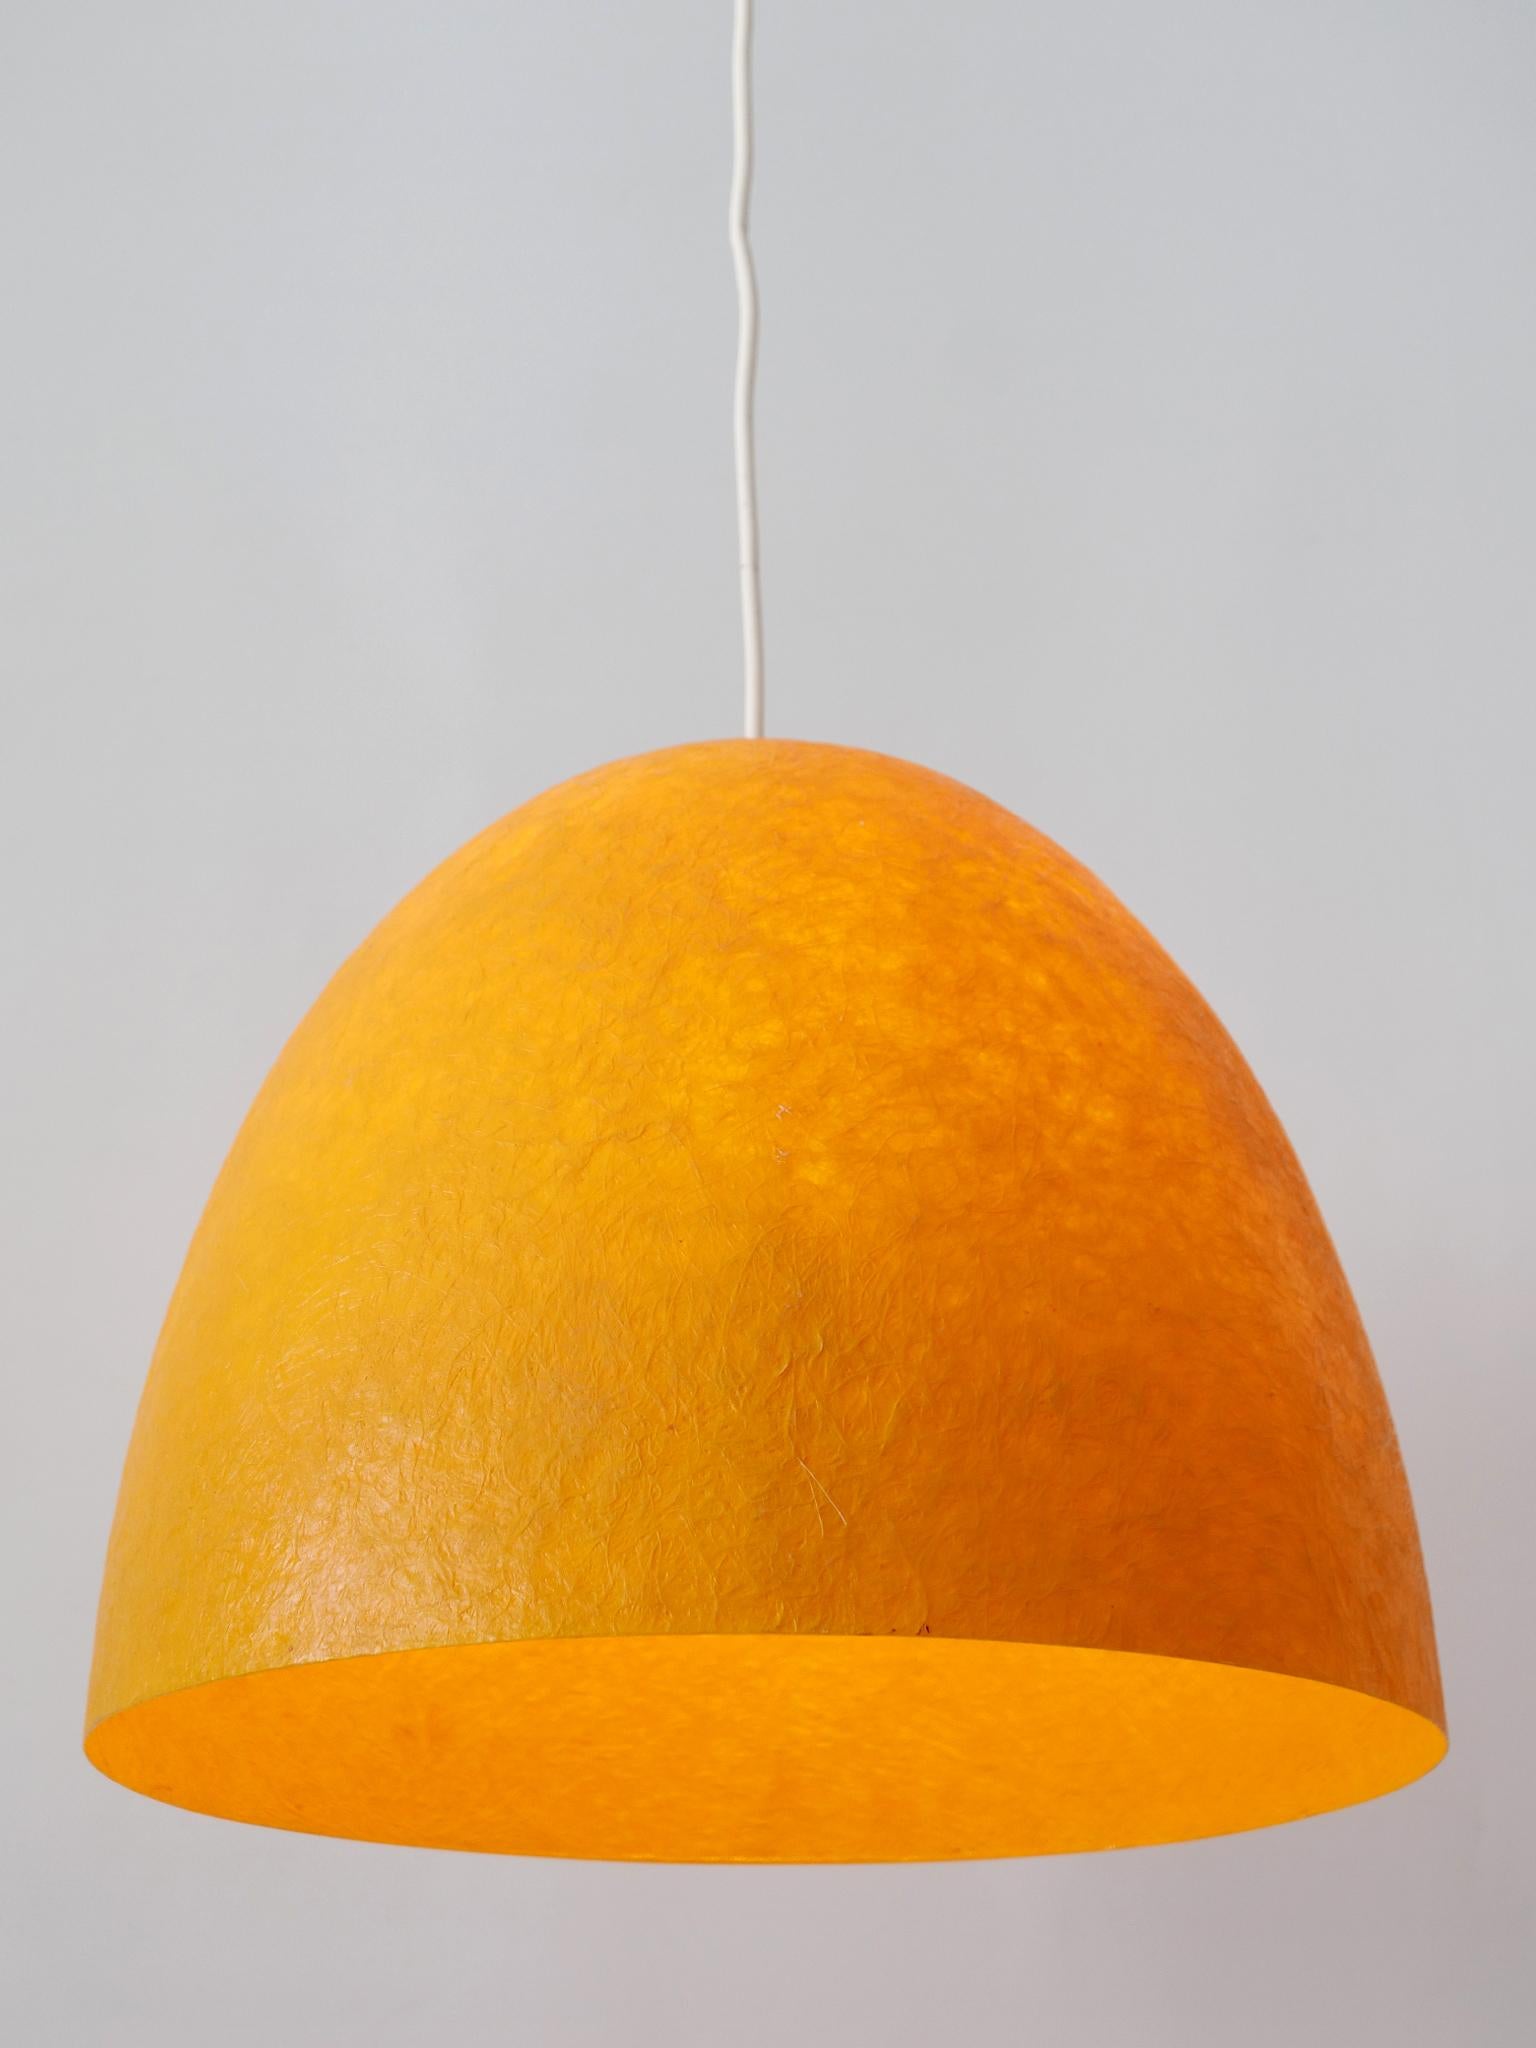 Extremely rare and elegant Mid-Century Modern pendant lamp or hanging light. Designed & manufactured in Germany, 1970s.

Executed in yellow colored fiberglass, the pendant lamp needs 1 x E27 / E26 Edison screw fit bulb. It is wired, in working